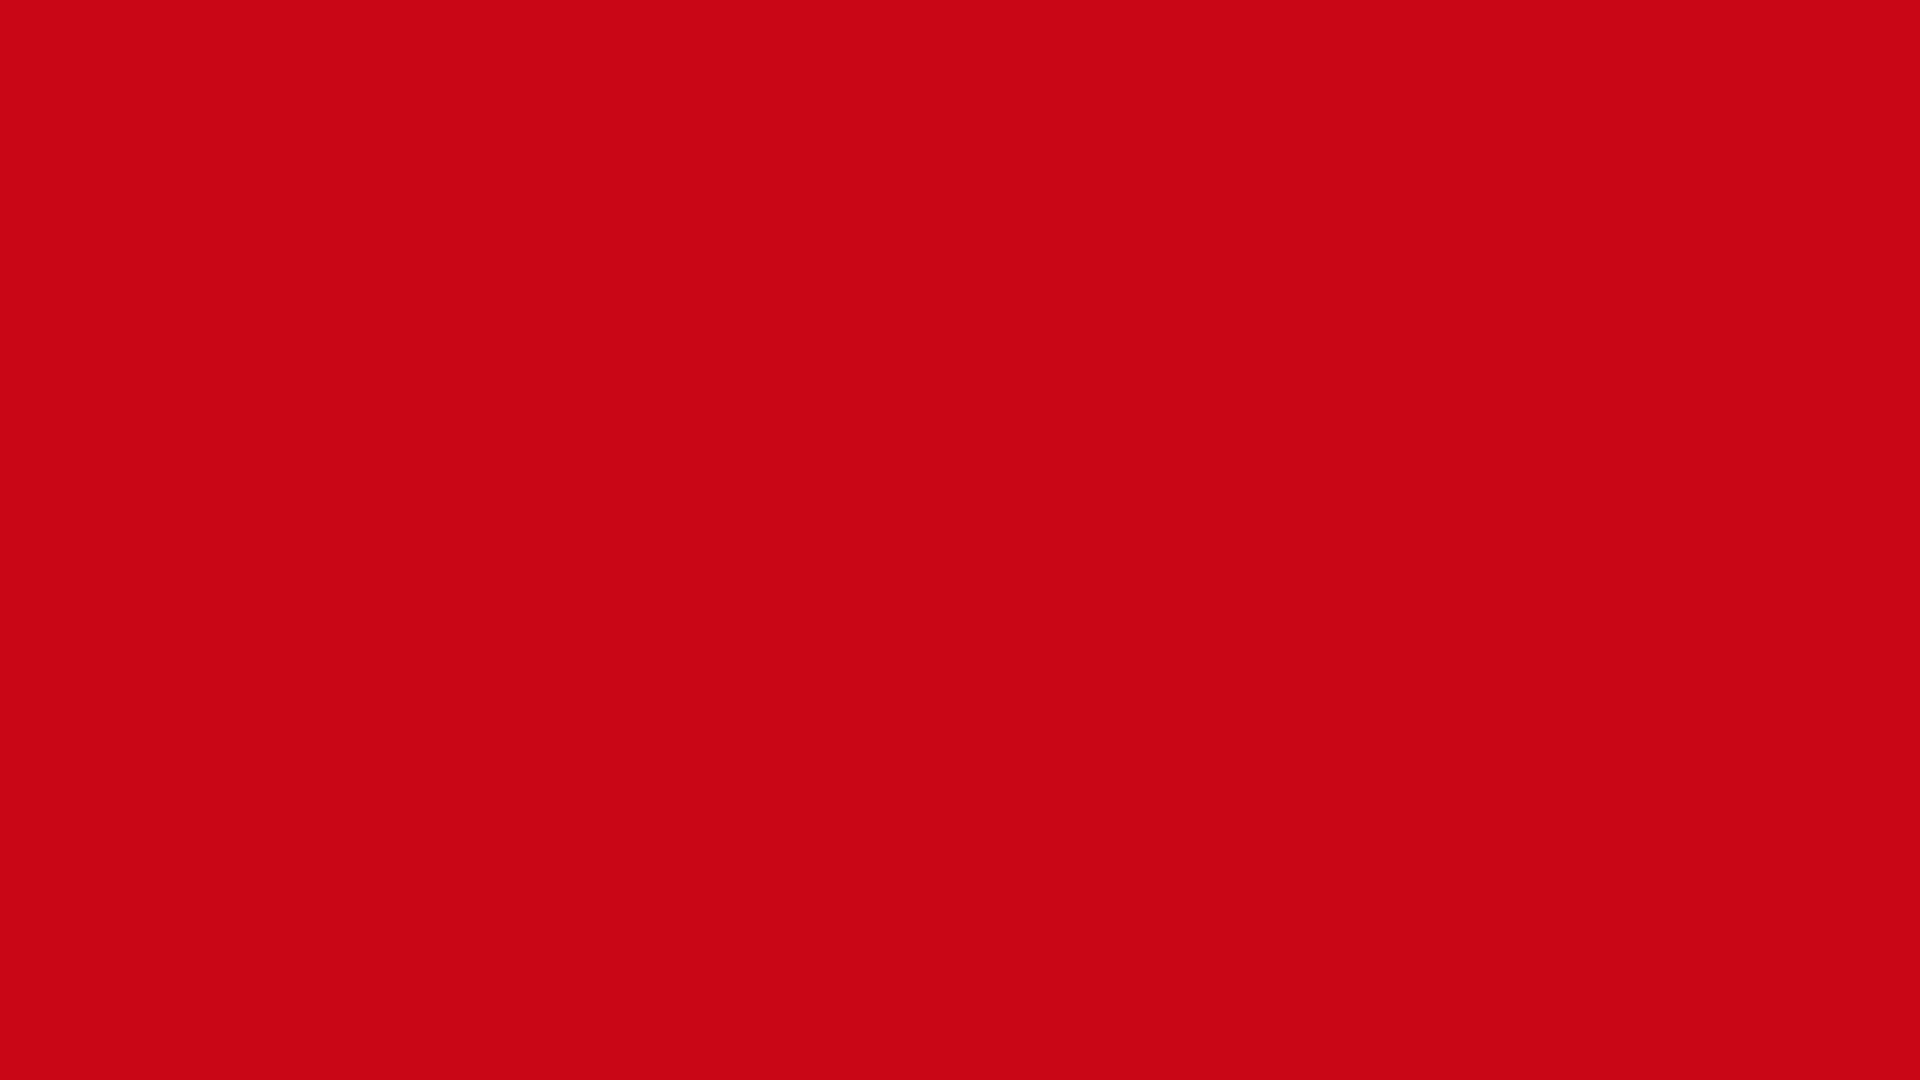 1920x1080 Venetian Red Solid Color Background